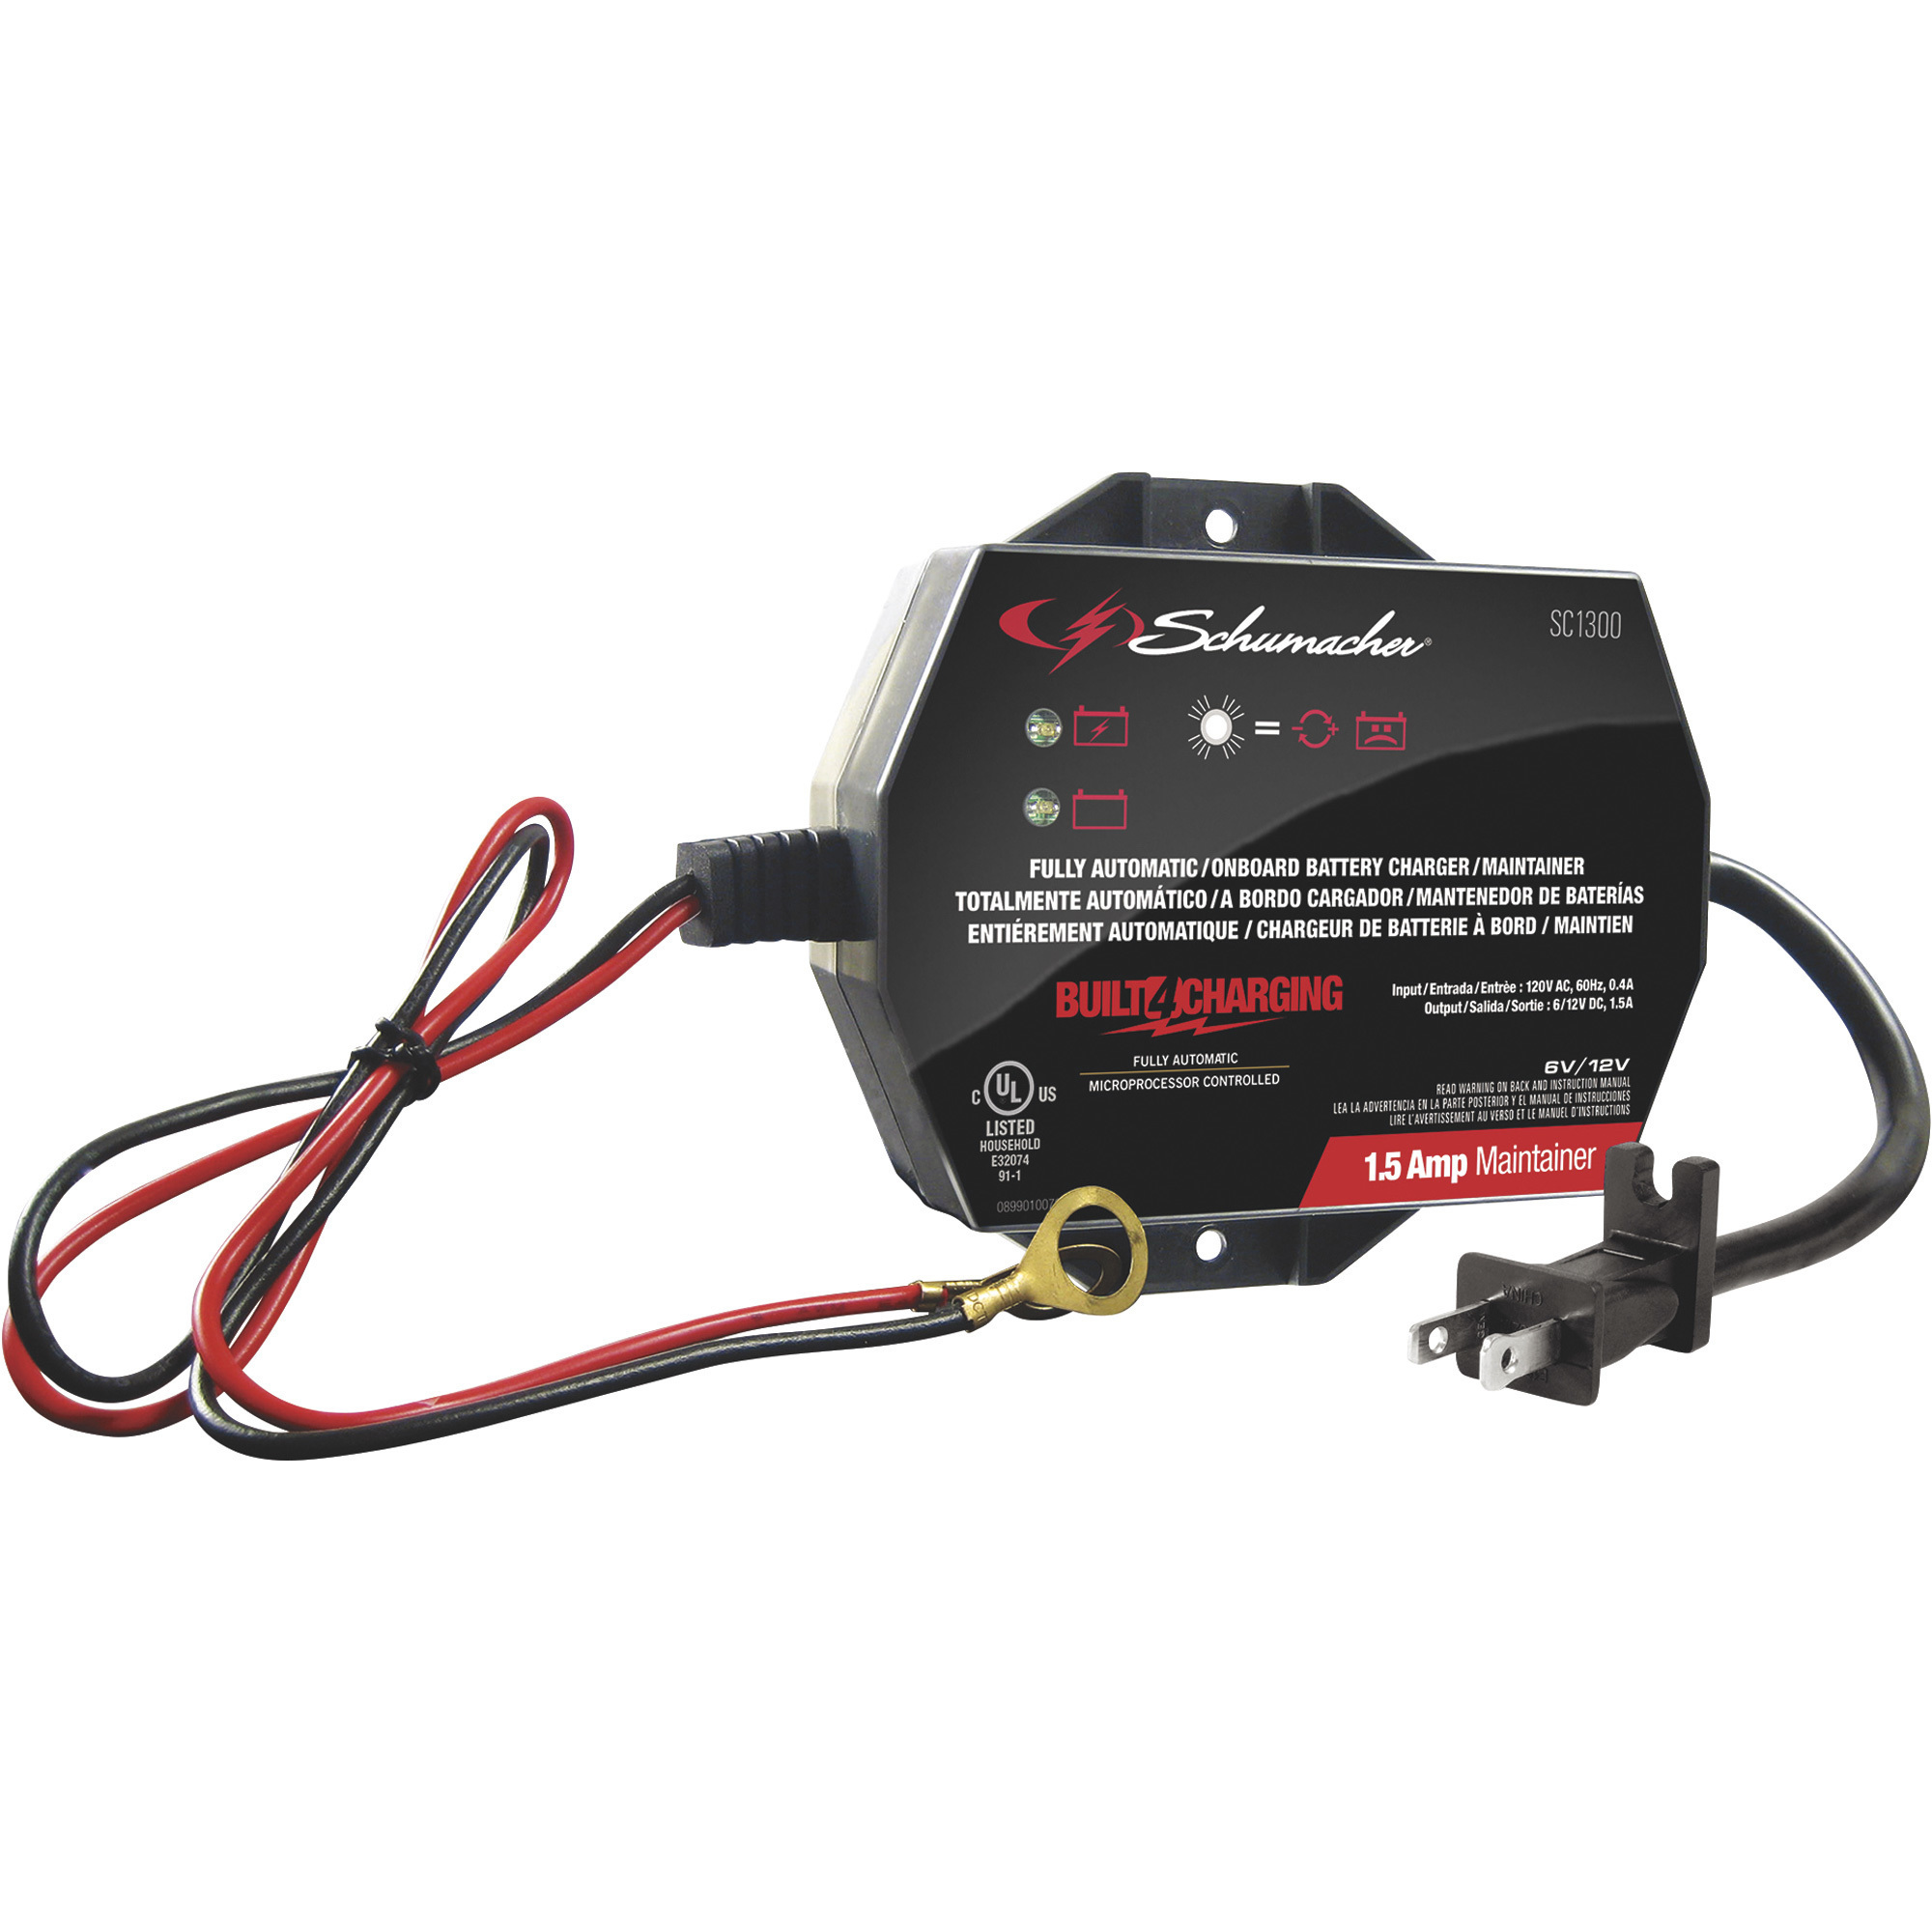 Schumacher On-Board Battery Charger/Trickle Charger — 6/12 Volt, 1.5 Amp,  Model# SC1300 | Northern Tool